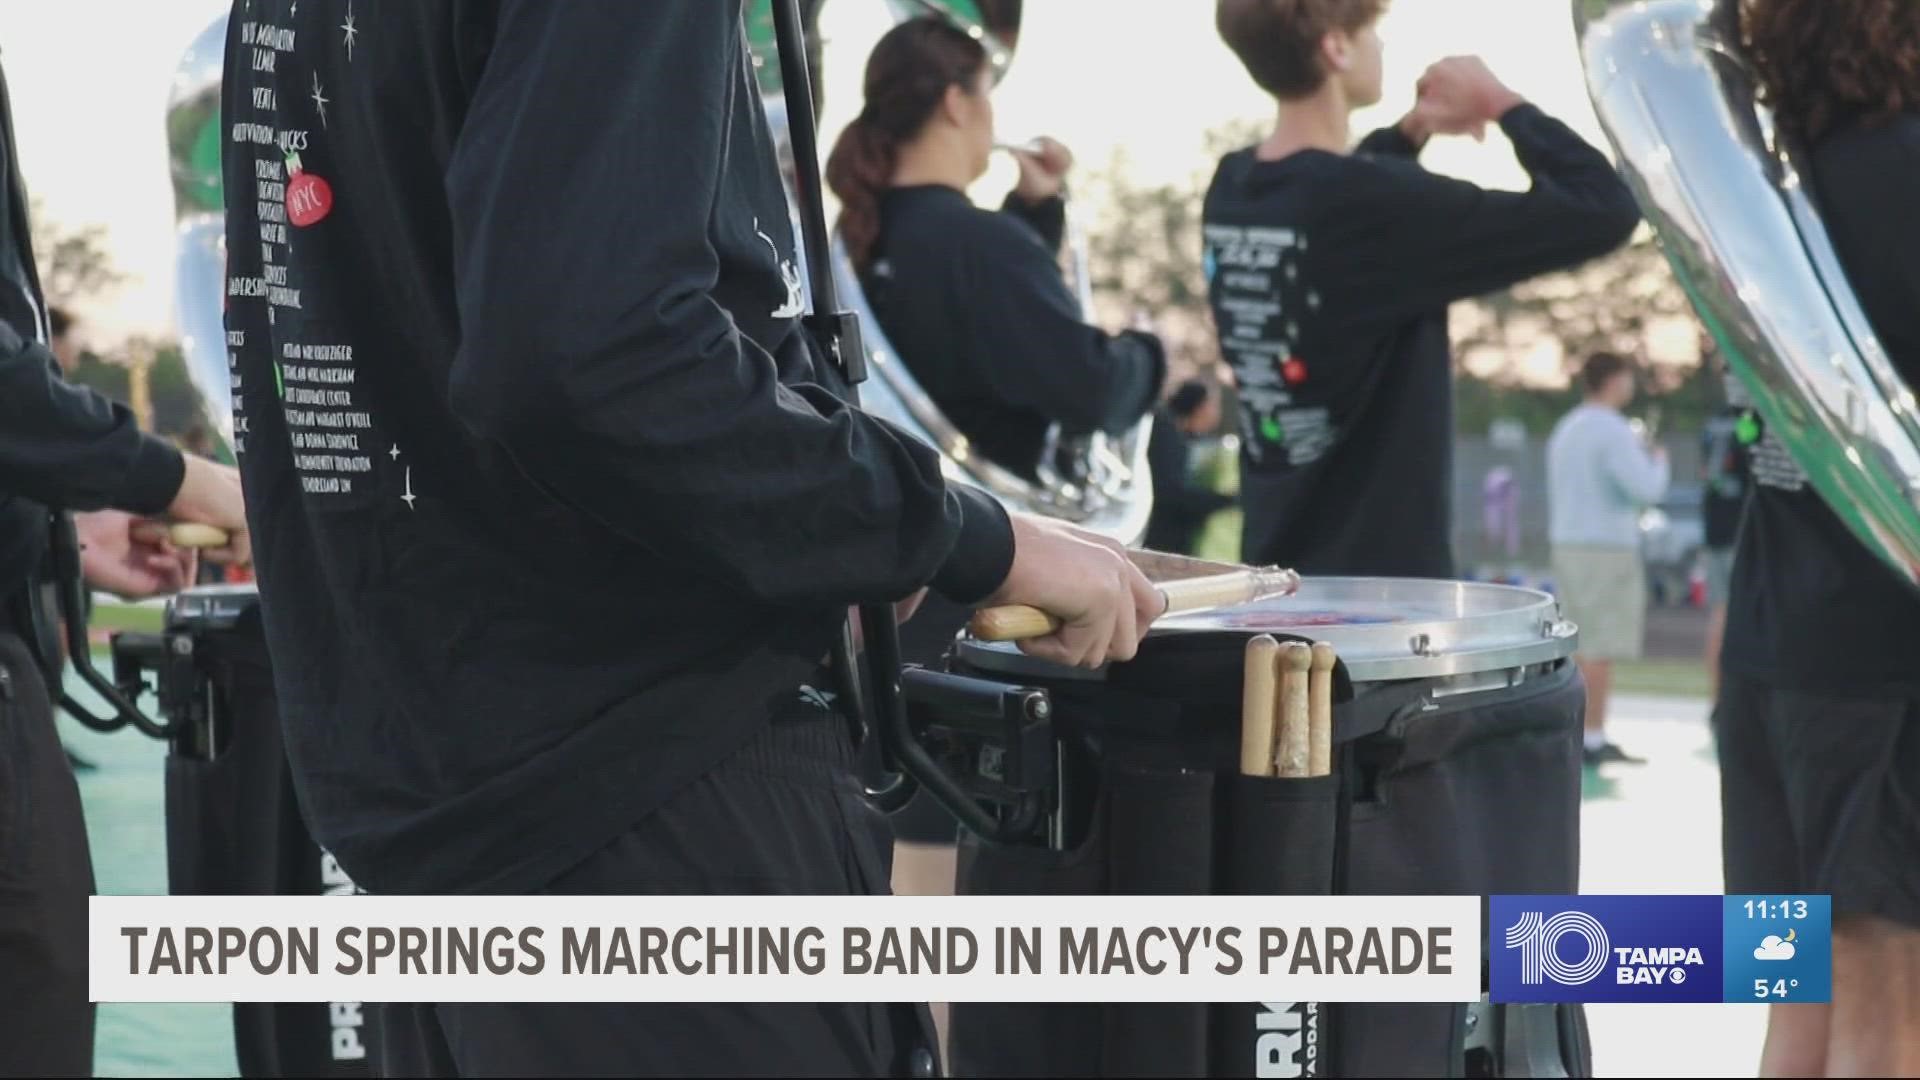 Band director Kevin Ford says this is a trip that’s been in the works since 2019.